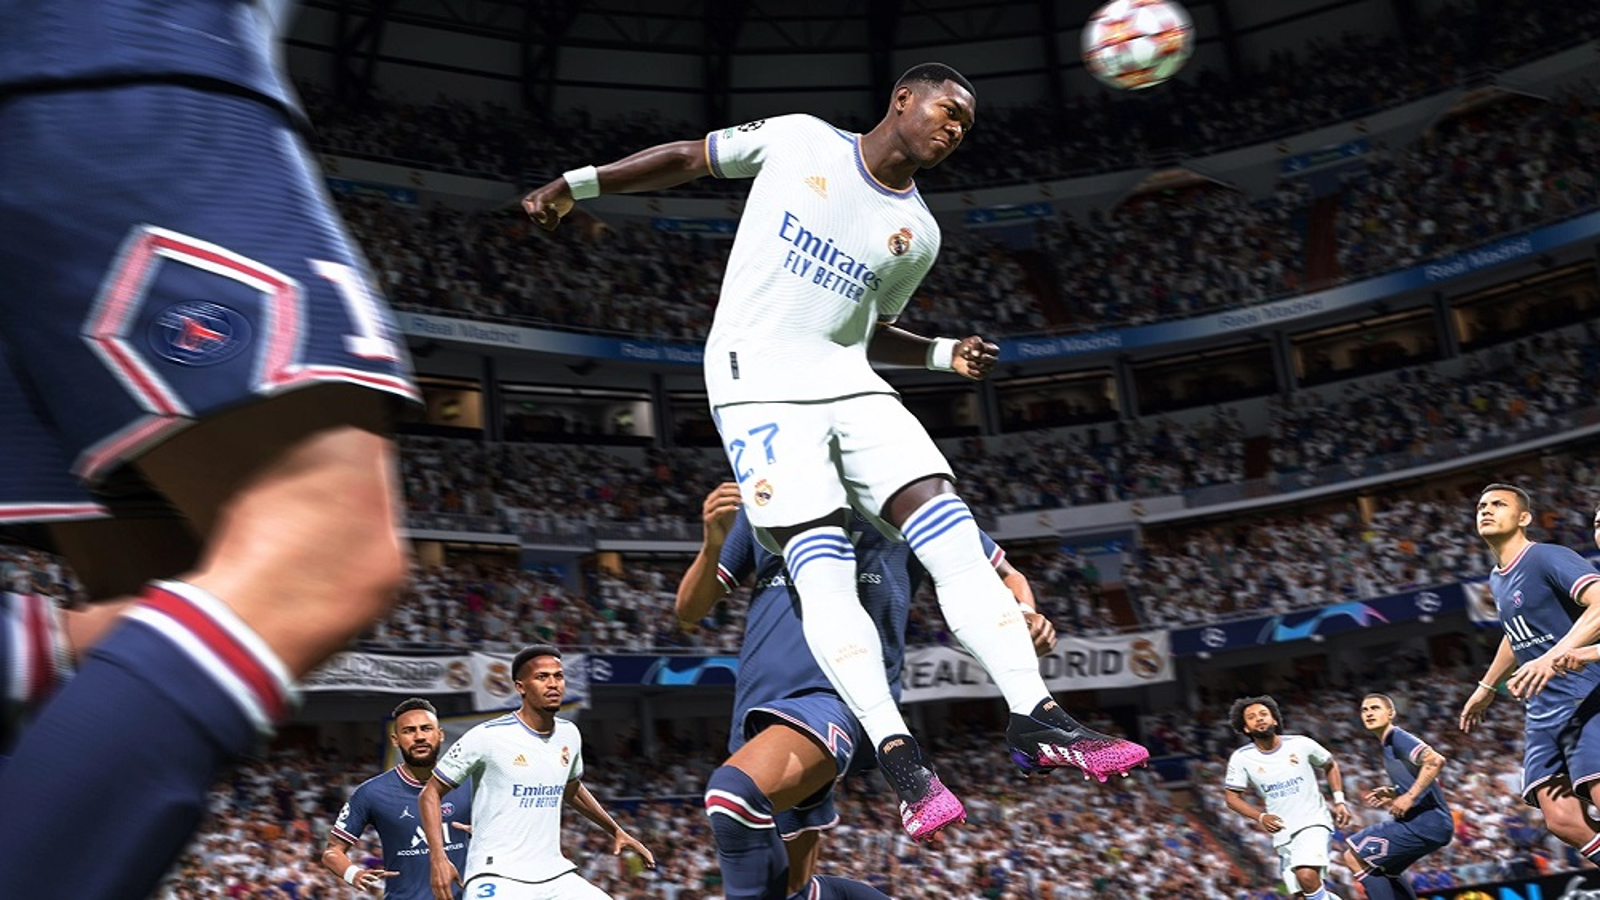 Ultimate Team modes make up 29% of EA's business